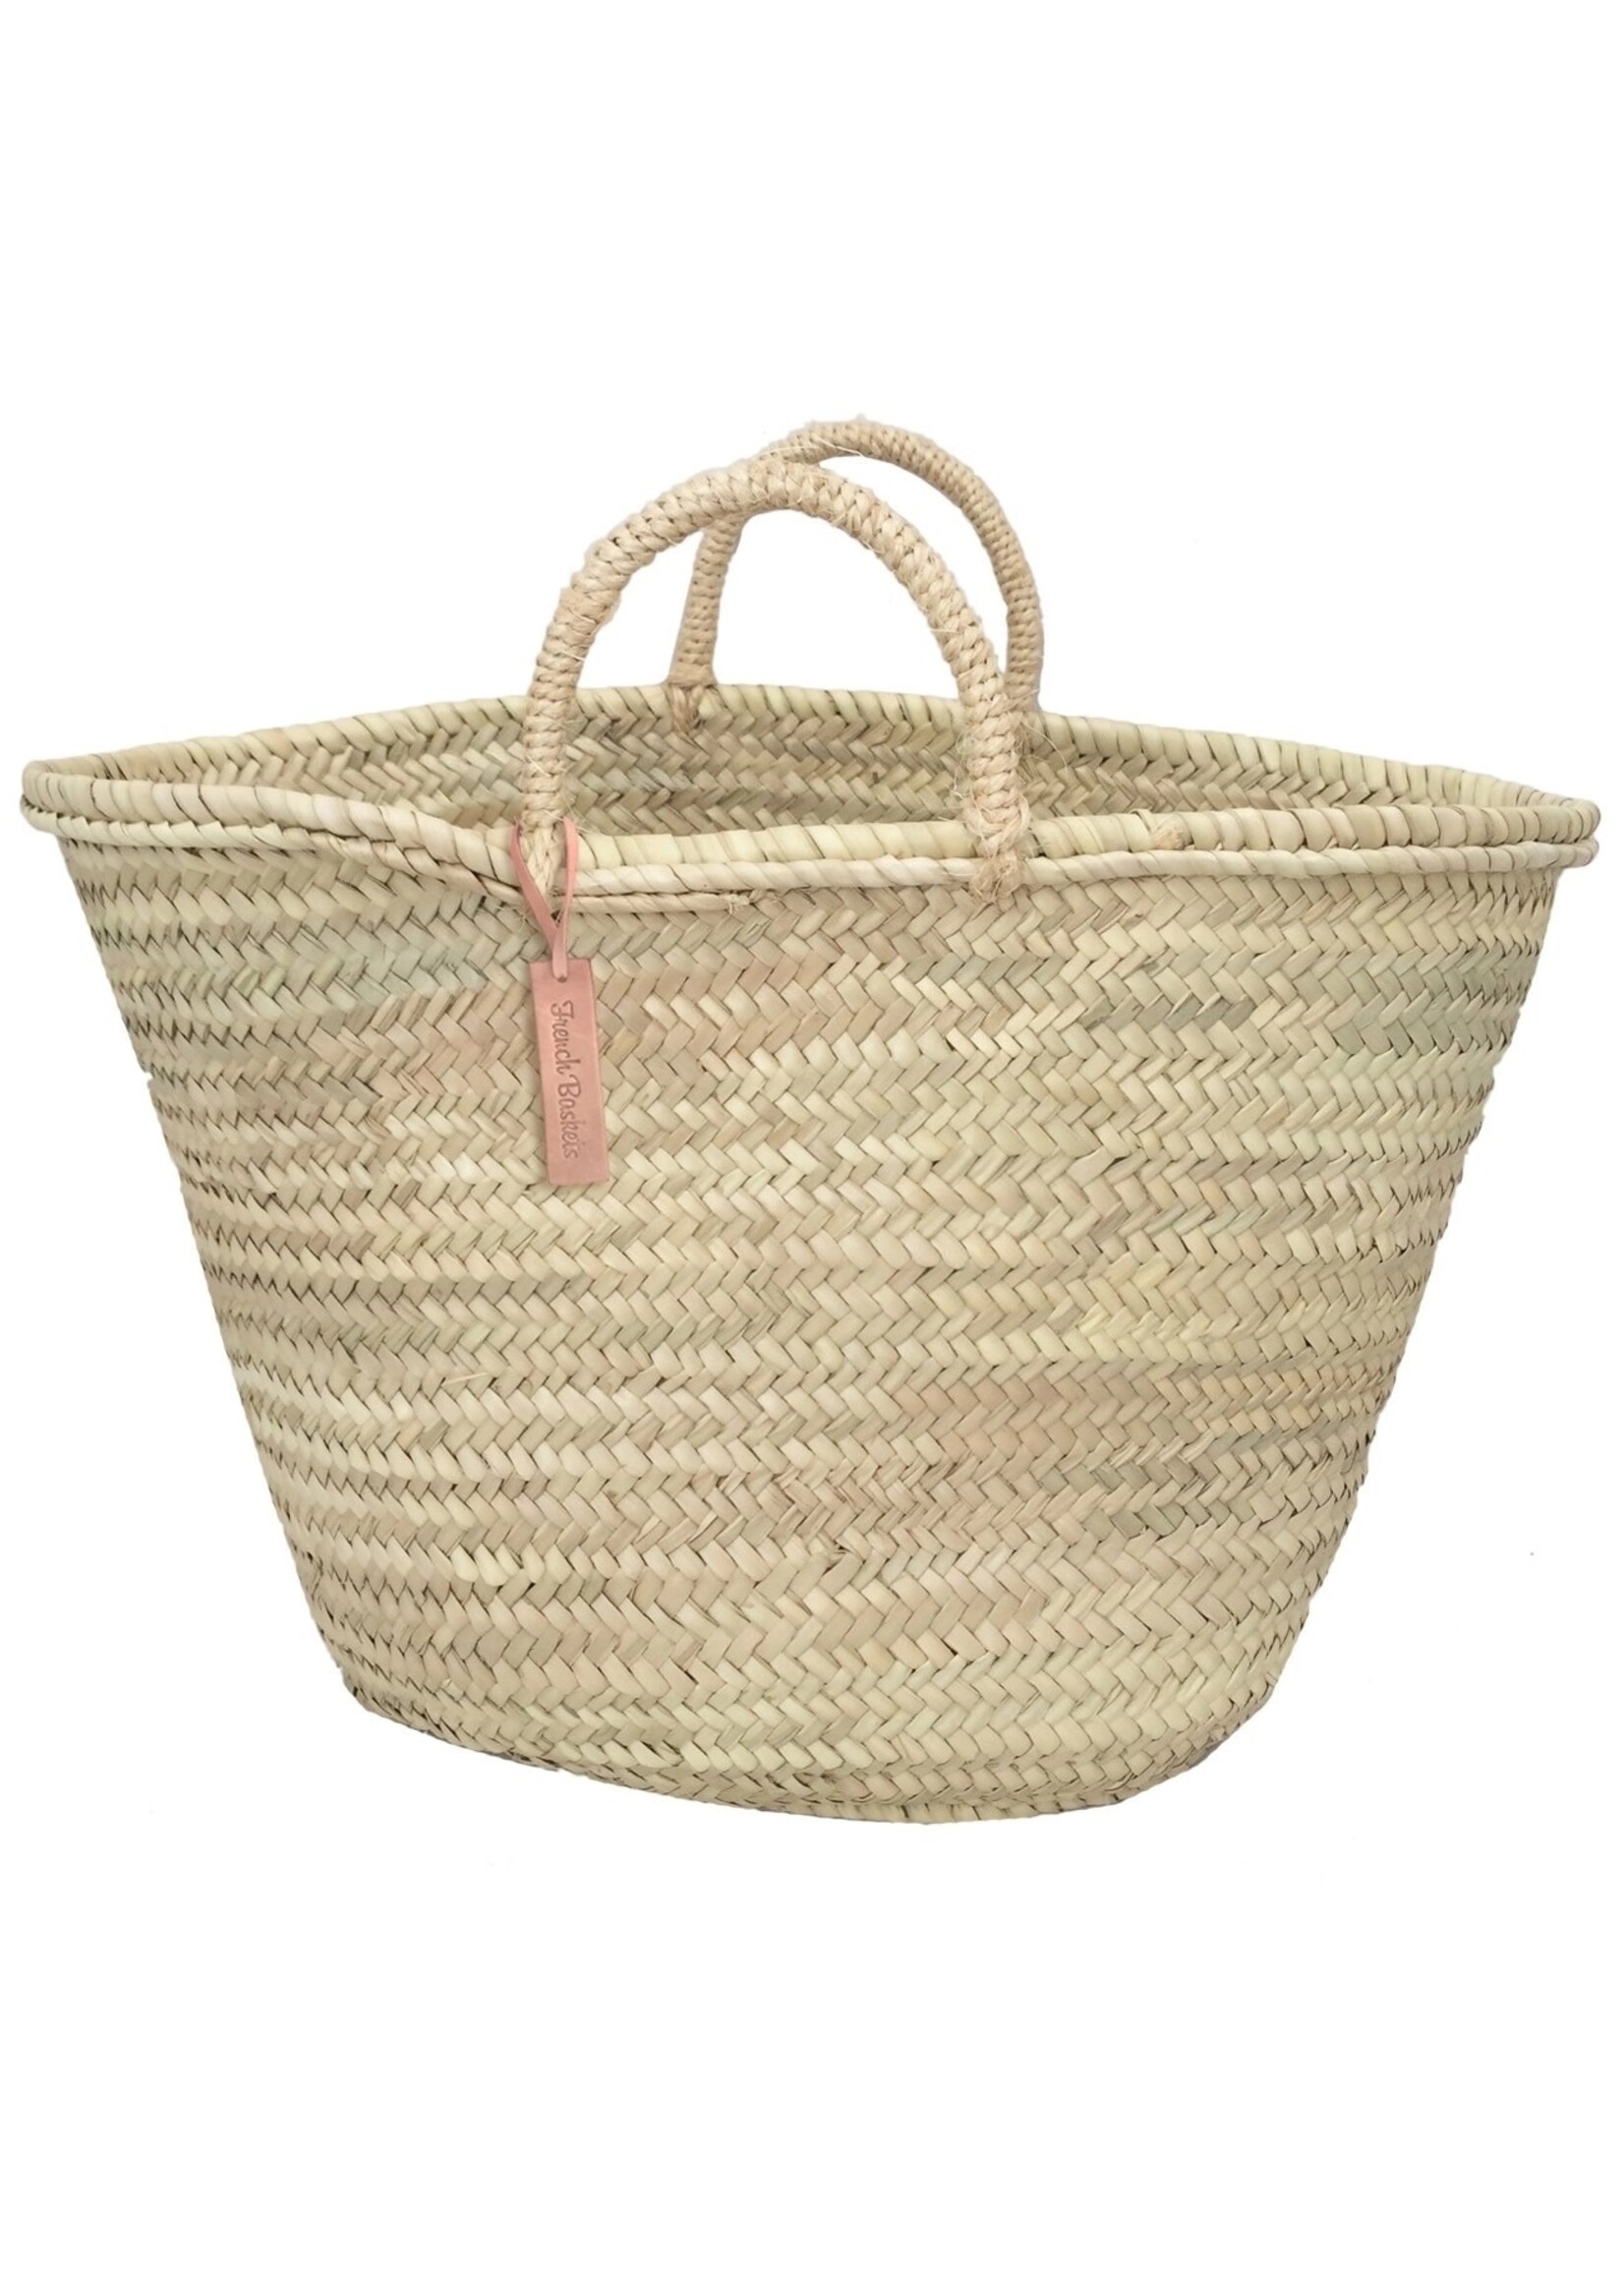 French Market Tote - The Coco - Extra Large